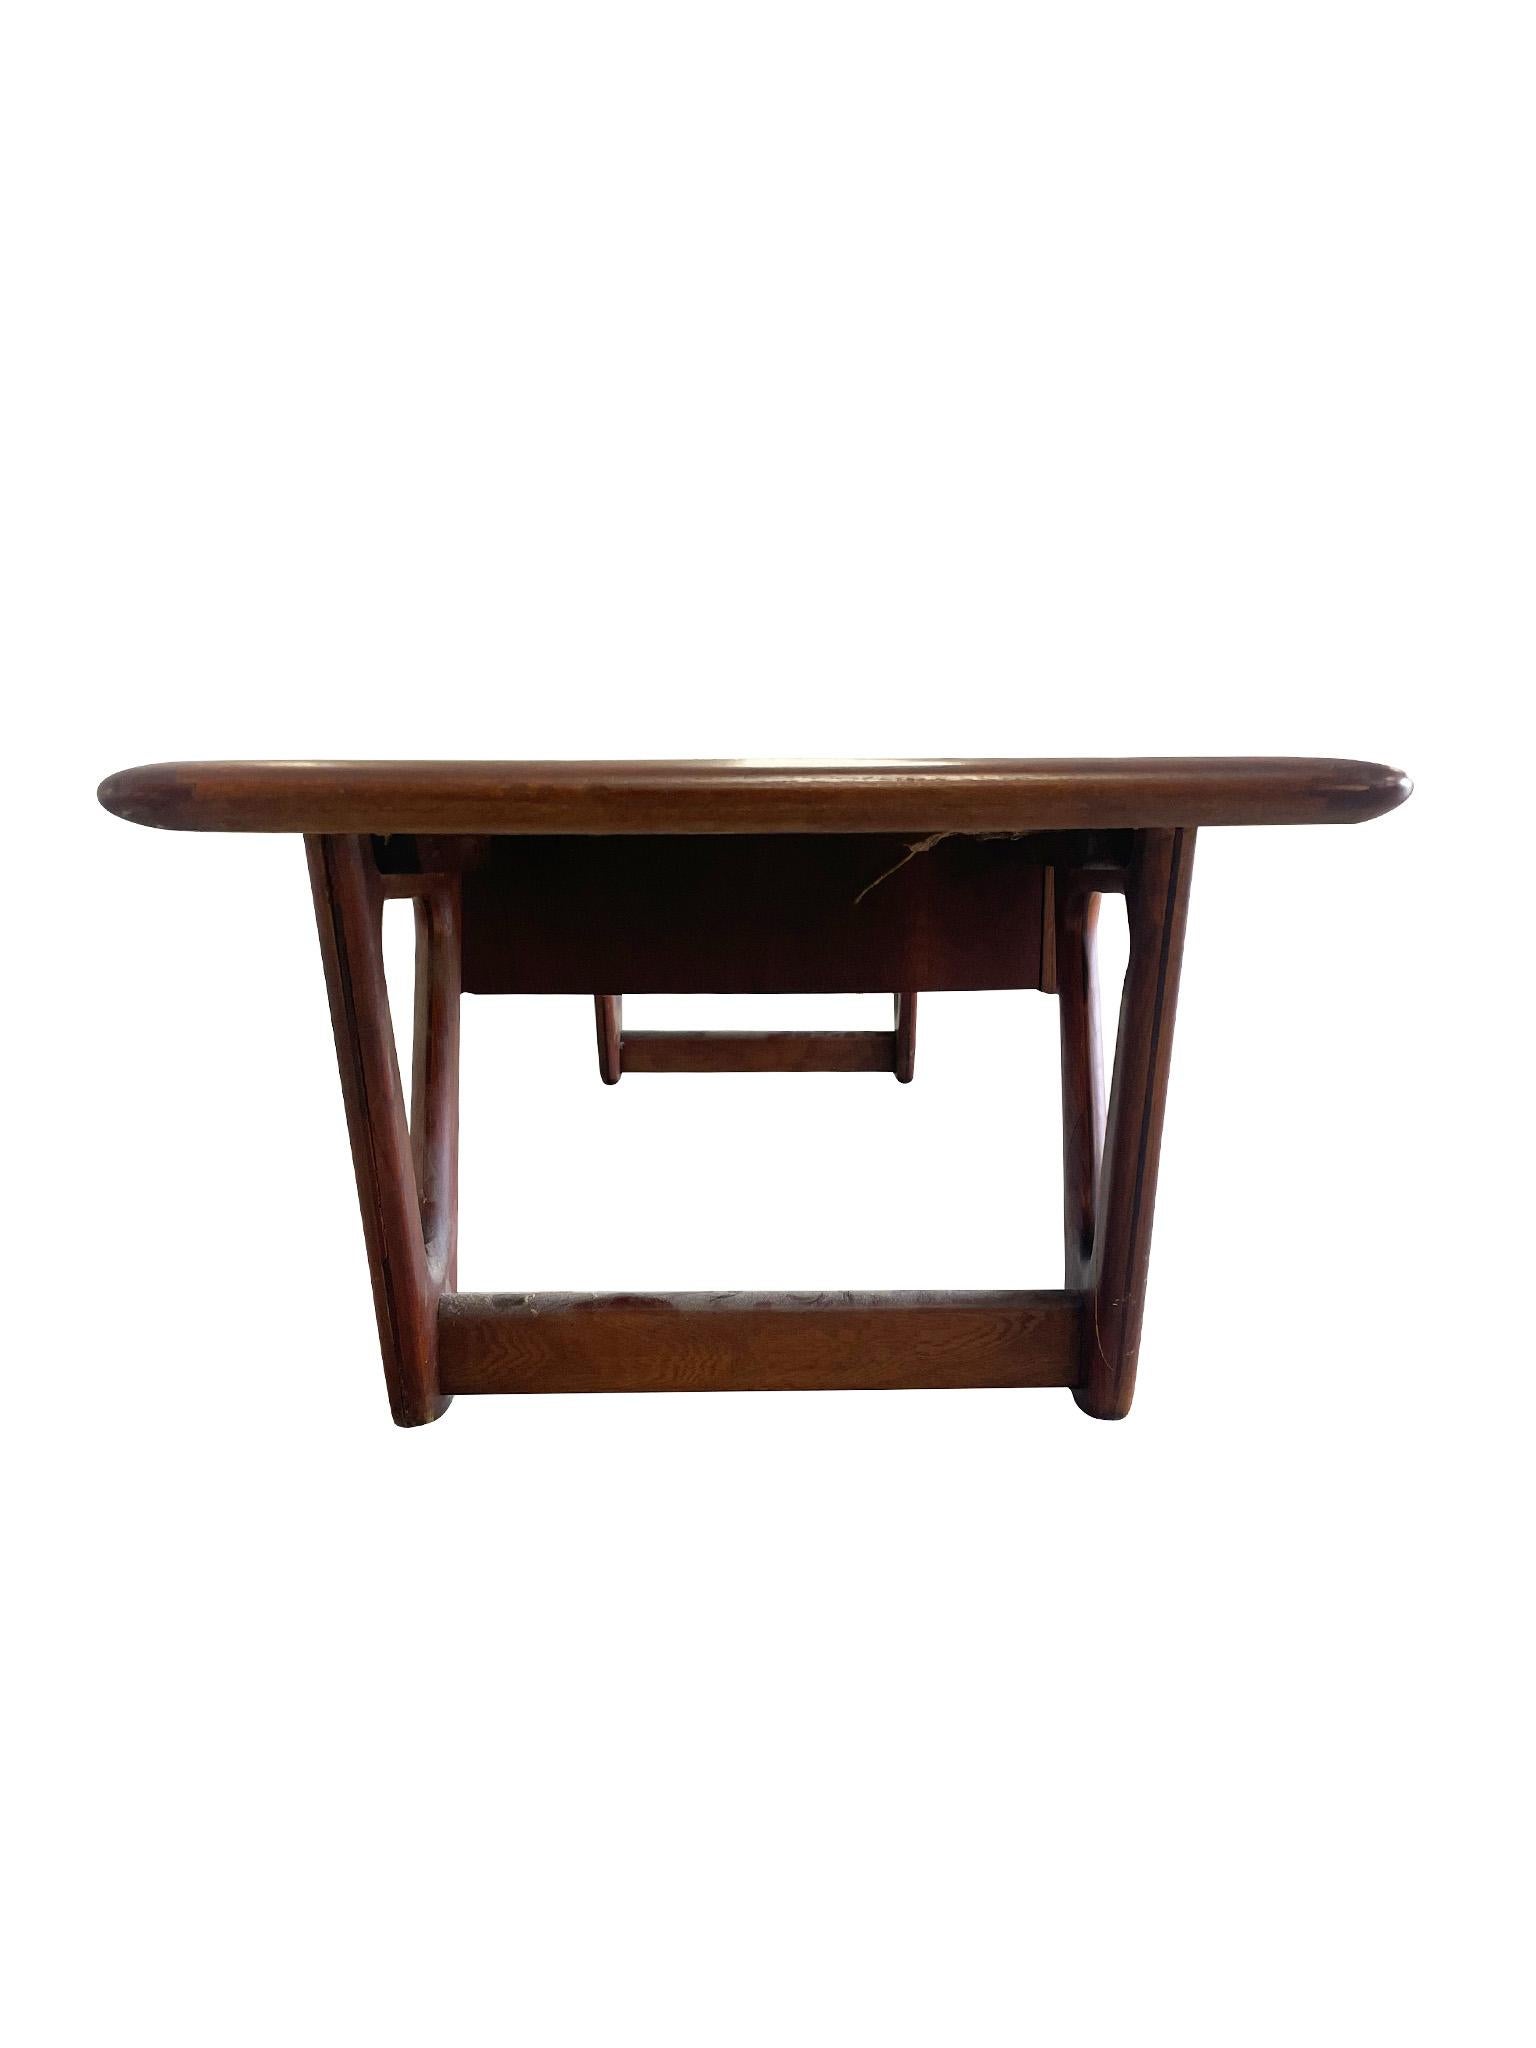 Mid-Century Modern Midcentury Walnut Coffee Table by Warren Church for Lane Company For Sale